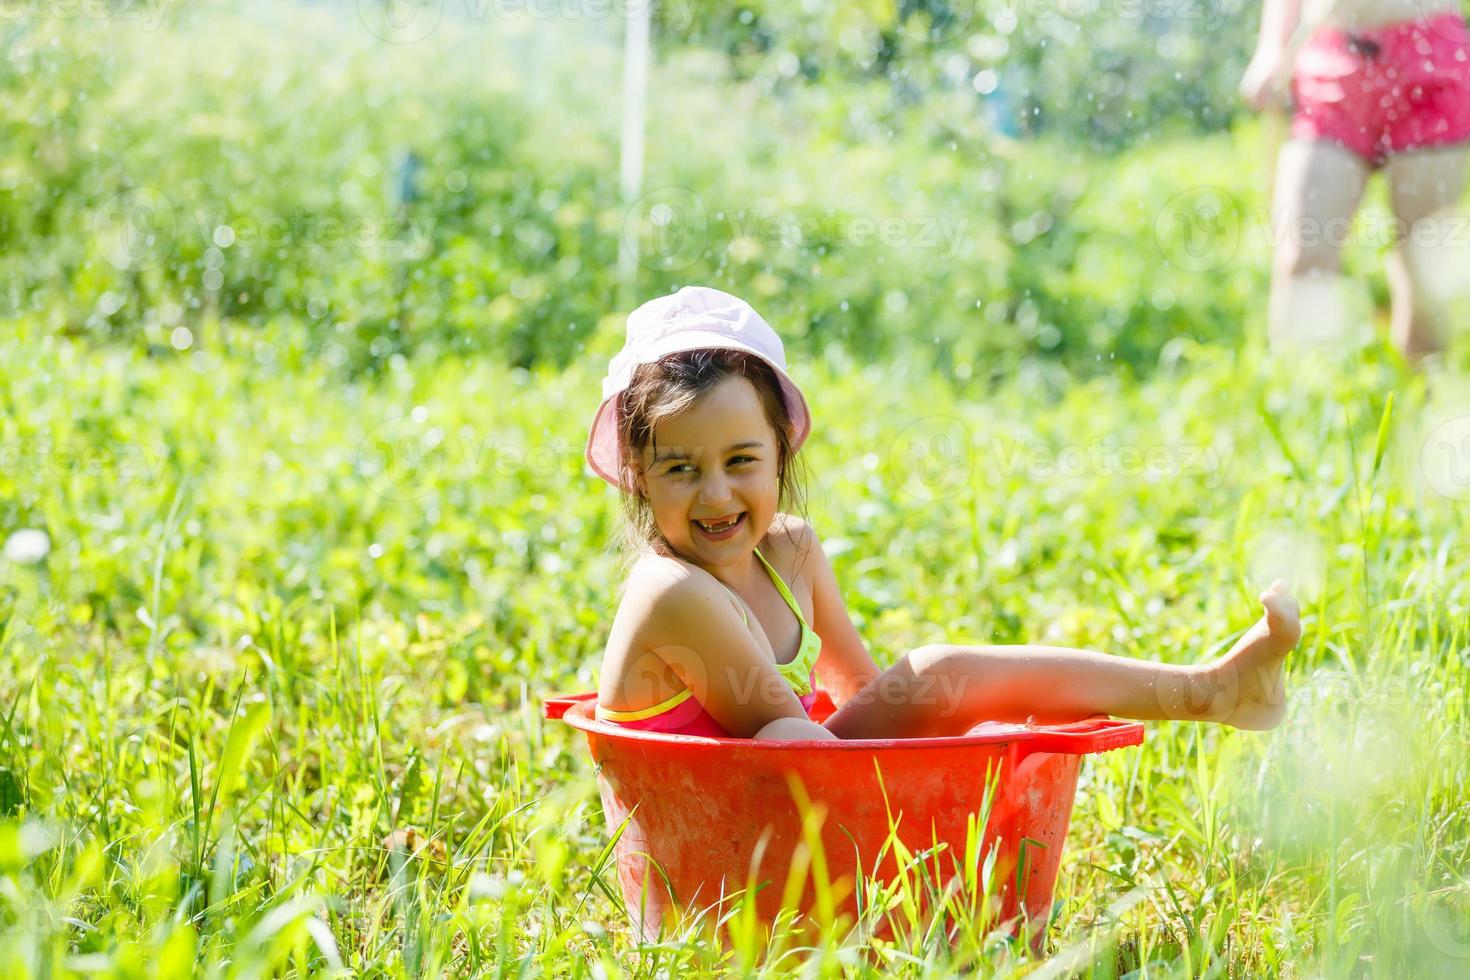 Child development in harmony with nature. Little beautiful girl playing fun with water and taking bath outdoors on the grass in vintage washing up bowl hygiene, happy childhood, nature concept photo